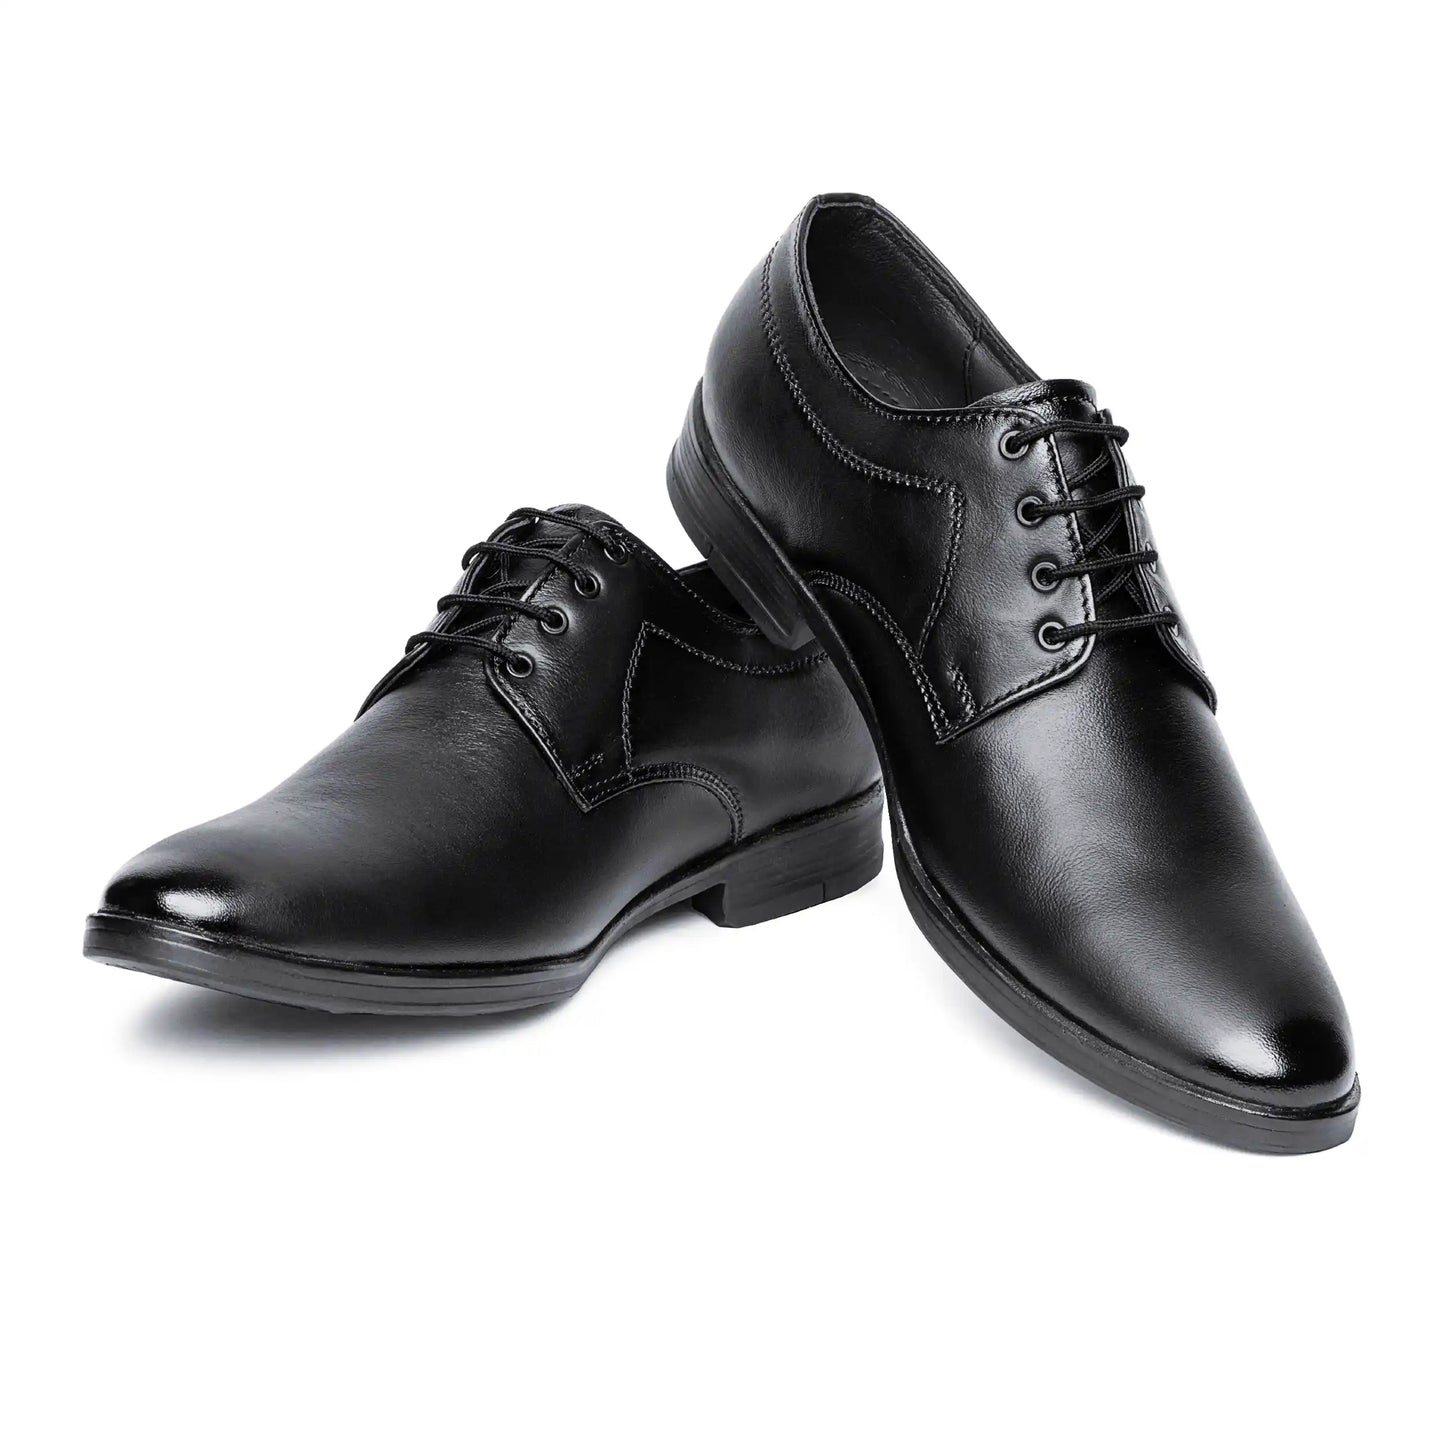 Genuine Leather Formal Shoes Lace Up